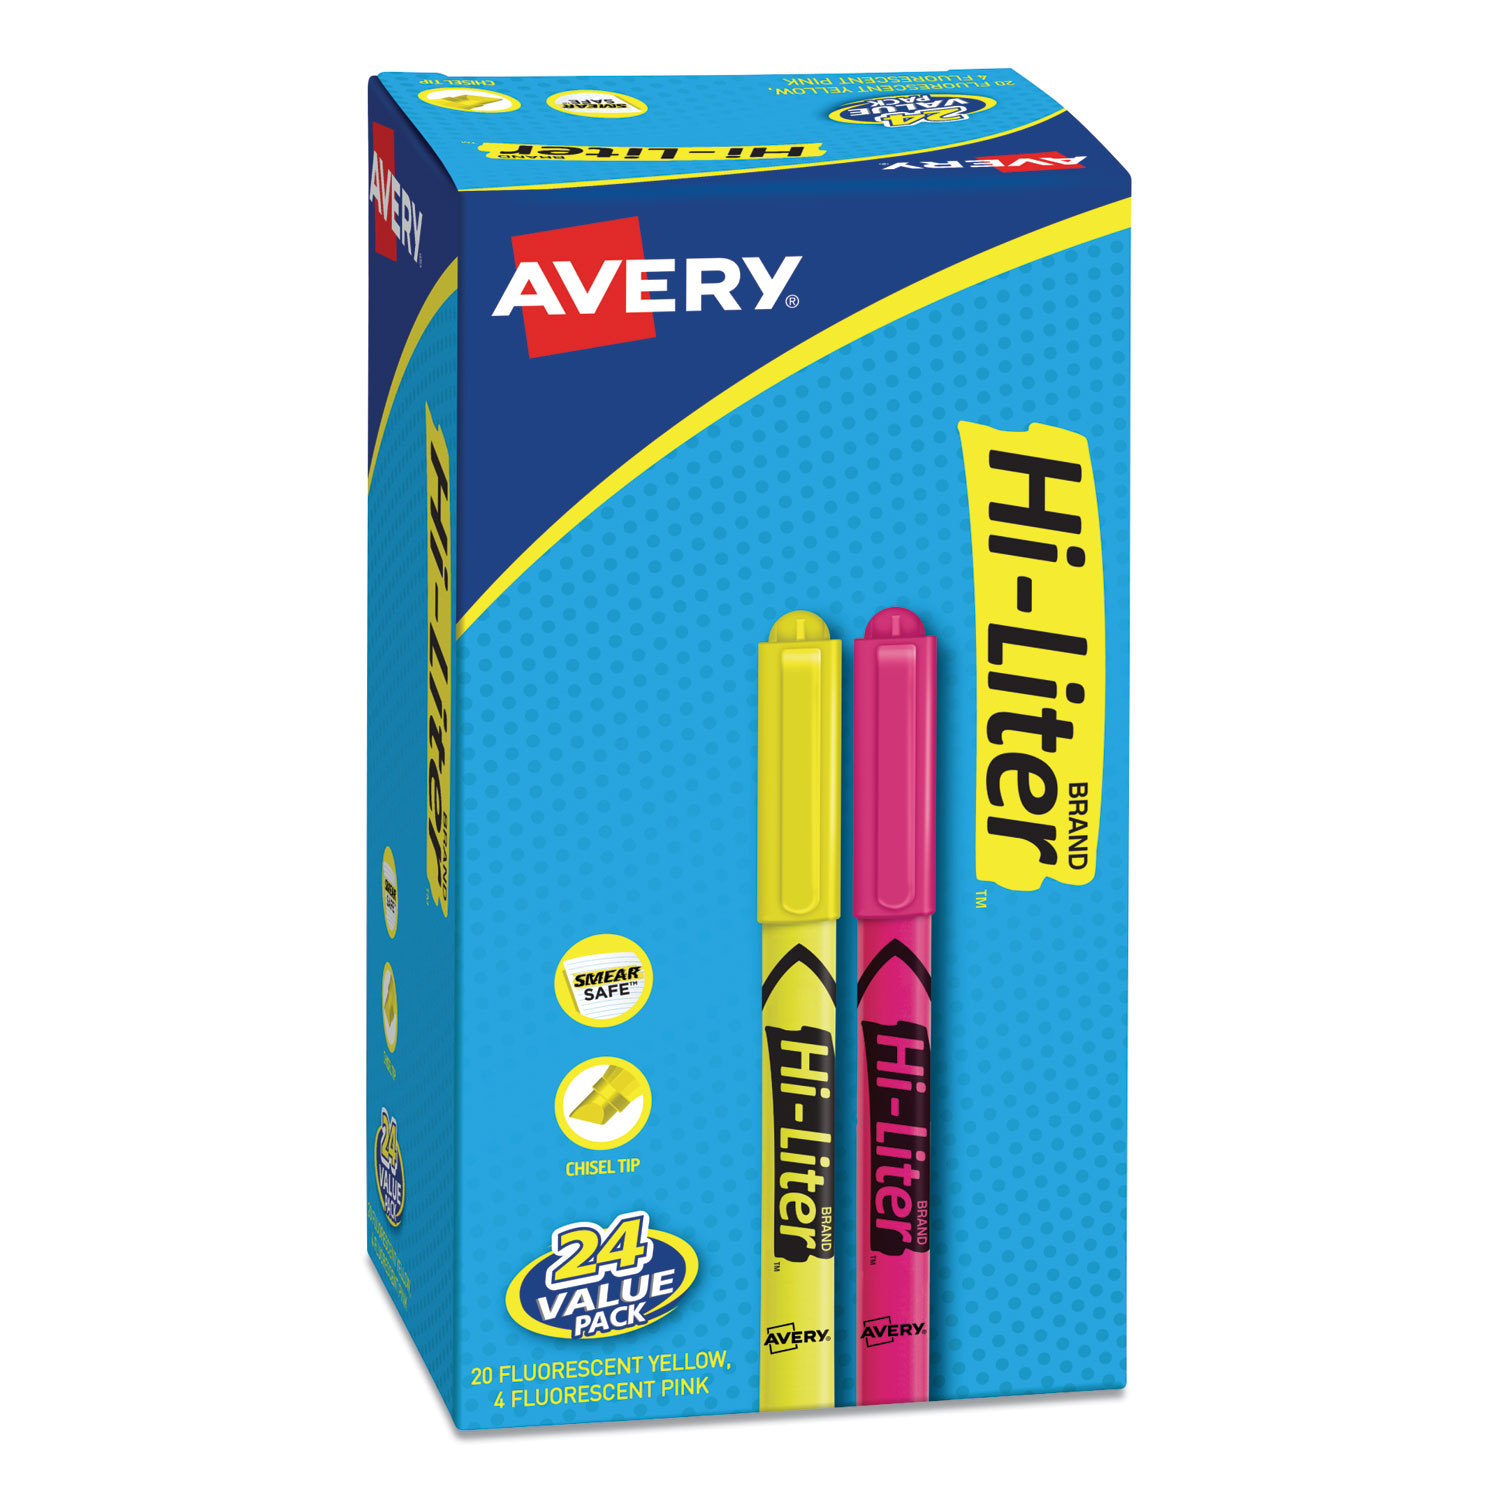  Avery 29861 HI-LITER Pen-Style Highlighters, Chisel Tip, Assorted Colors, 24/Pack (AVE29861) 